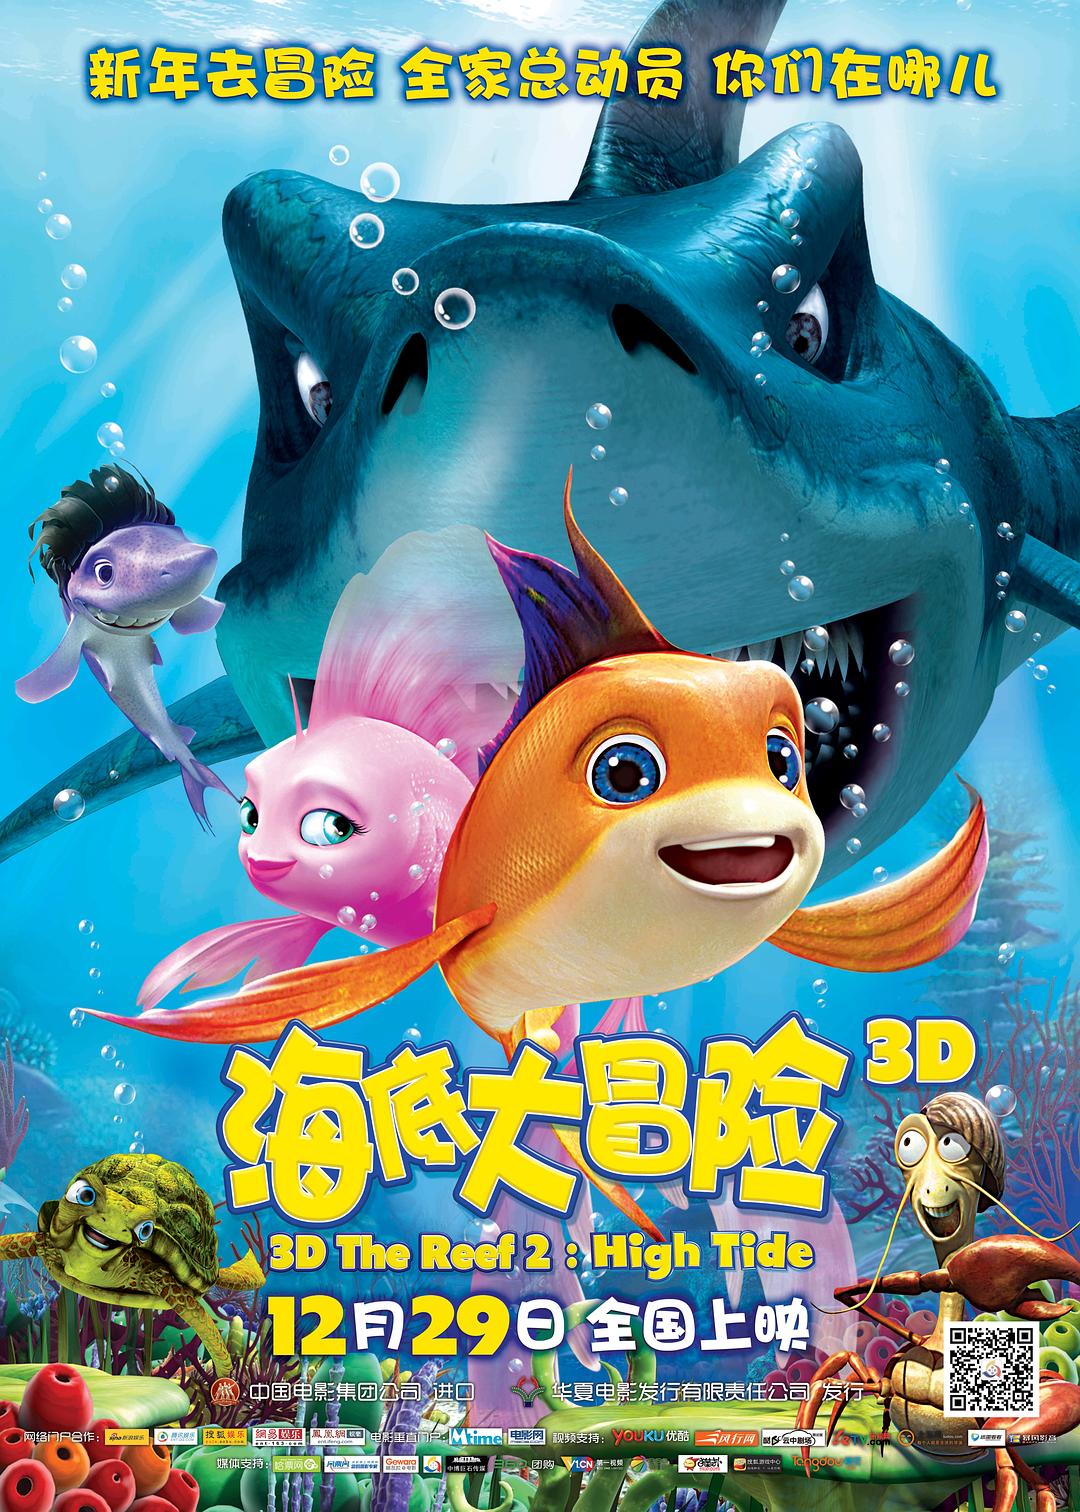 ״ð/󱤽2 The.Reef.2.High.Tide.2012.1080p.BluRay.x264-UNTOUCHABLES 4.37GB-1.png